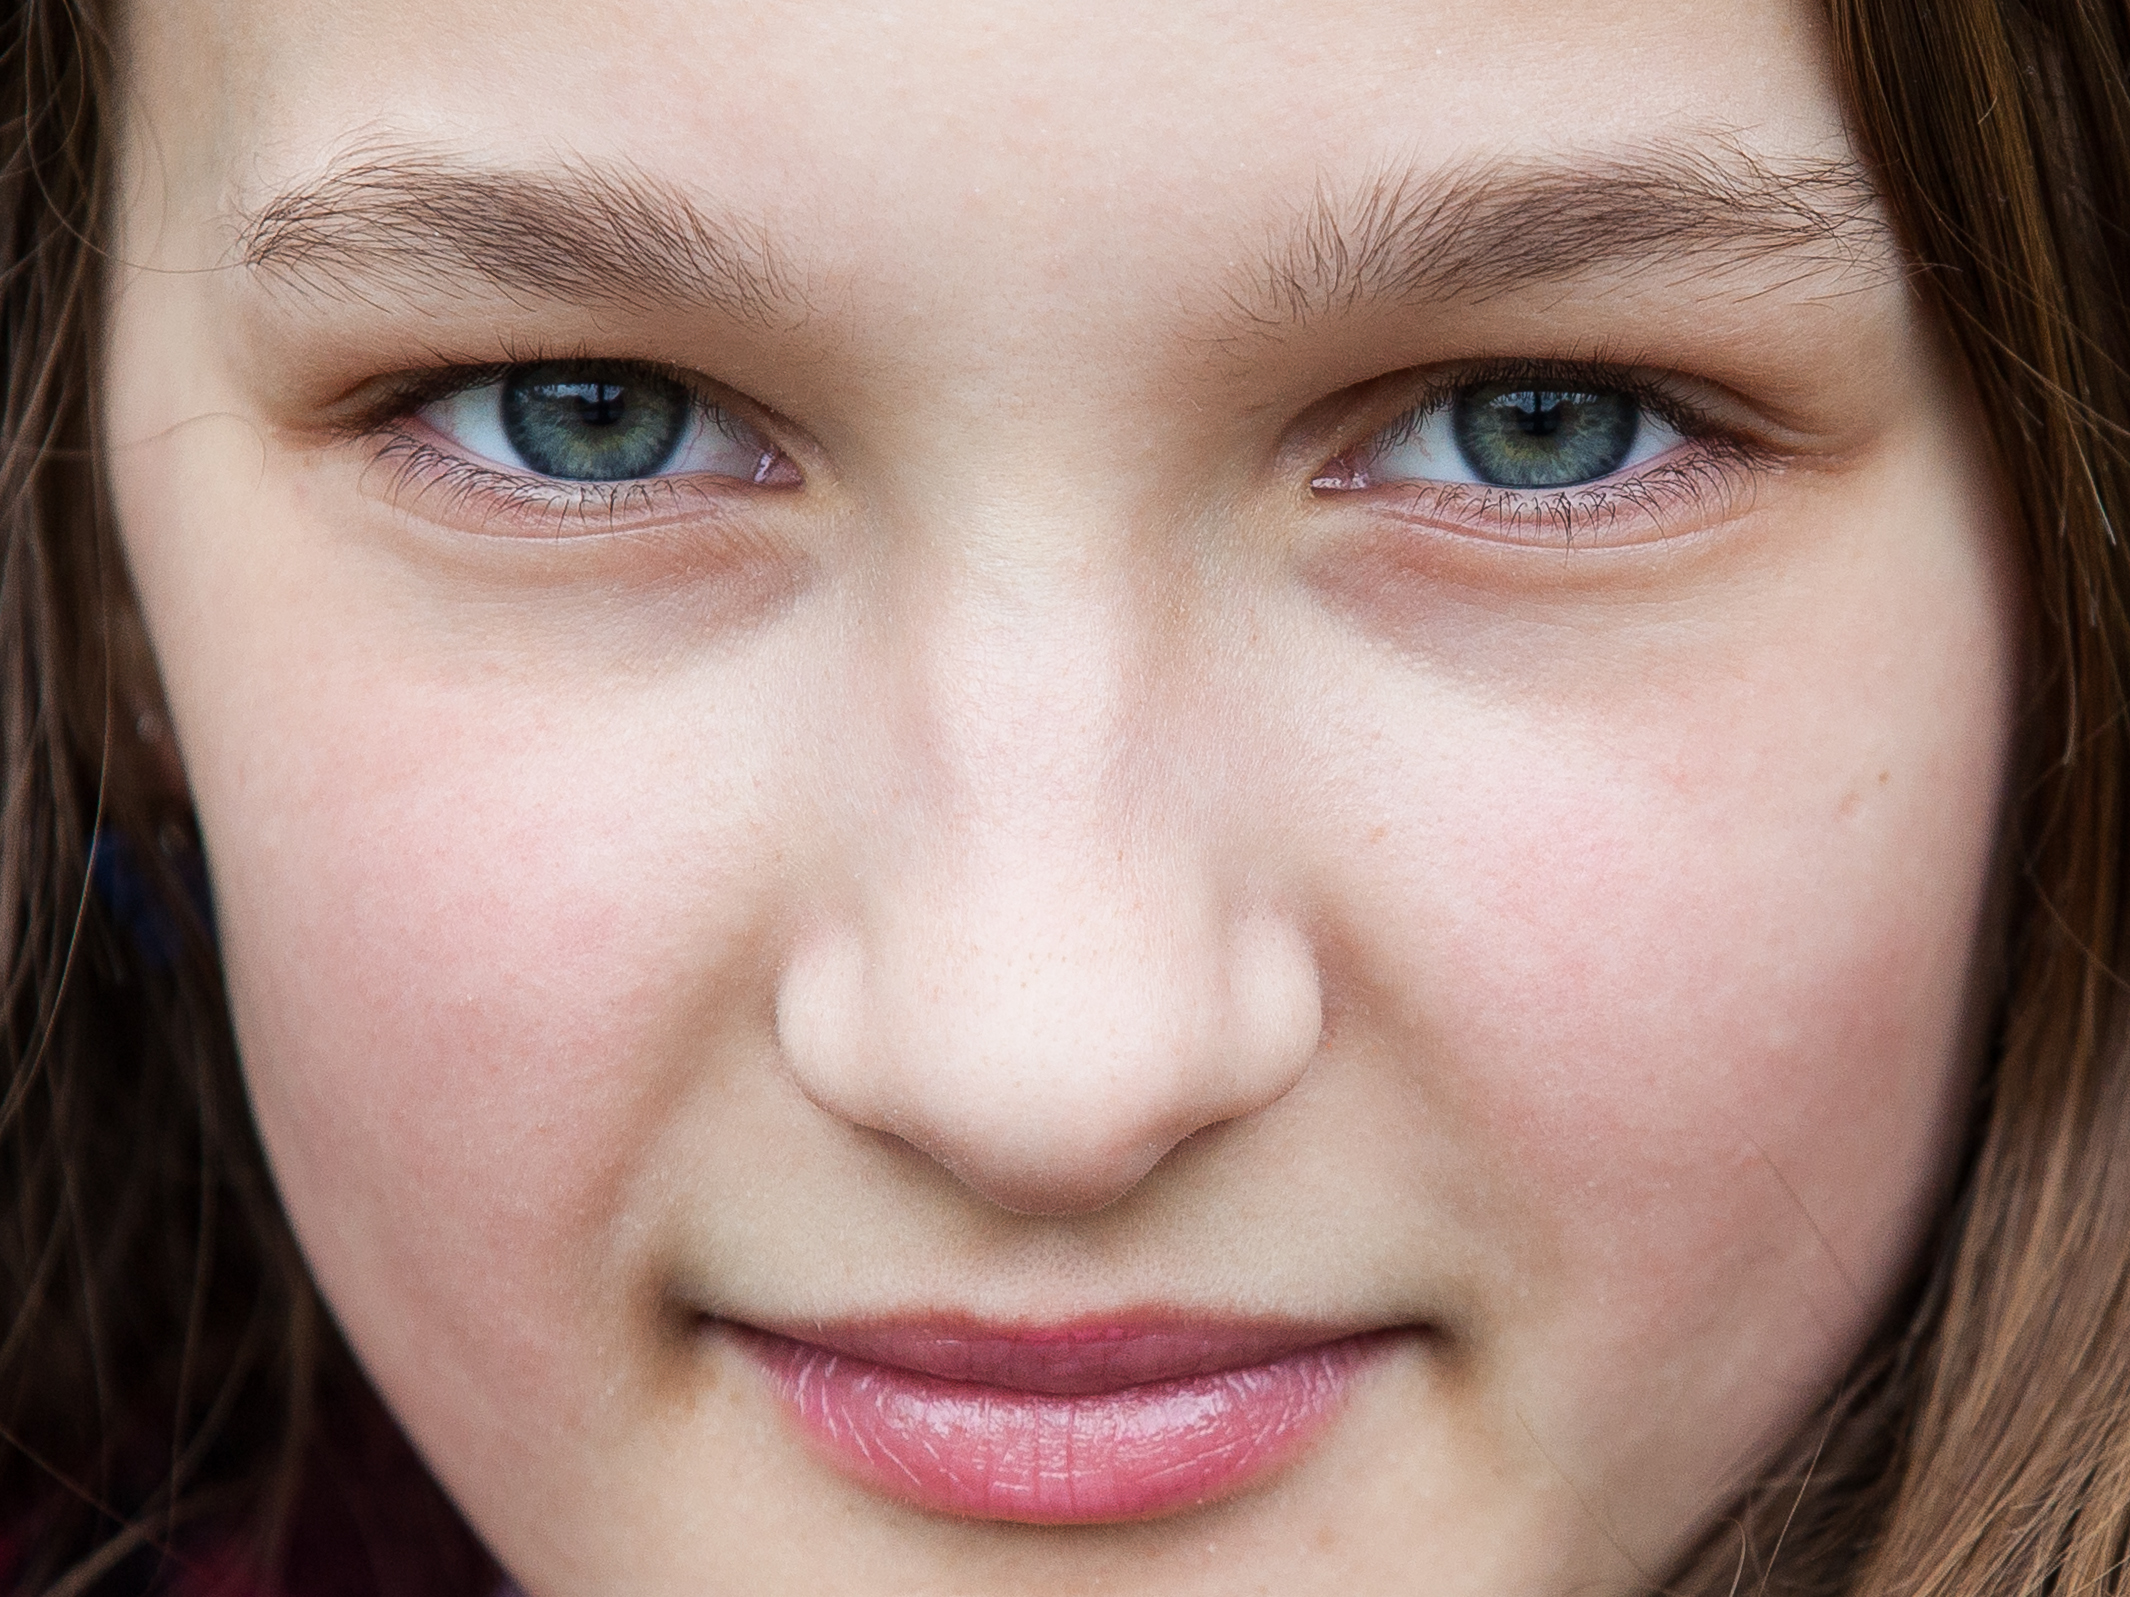 an amazingly beautiful Catholic 12-year-old girl photographed in April 2014, picture 28, cropped